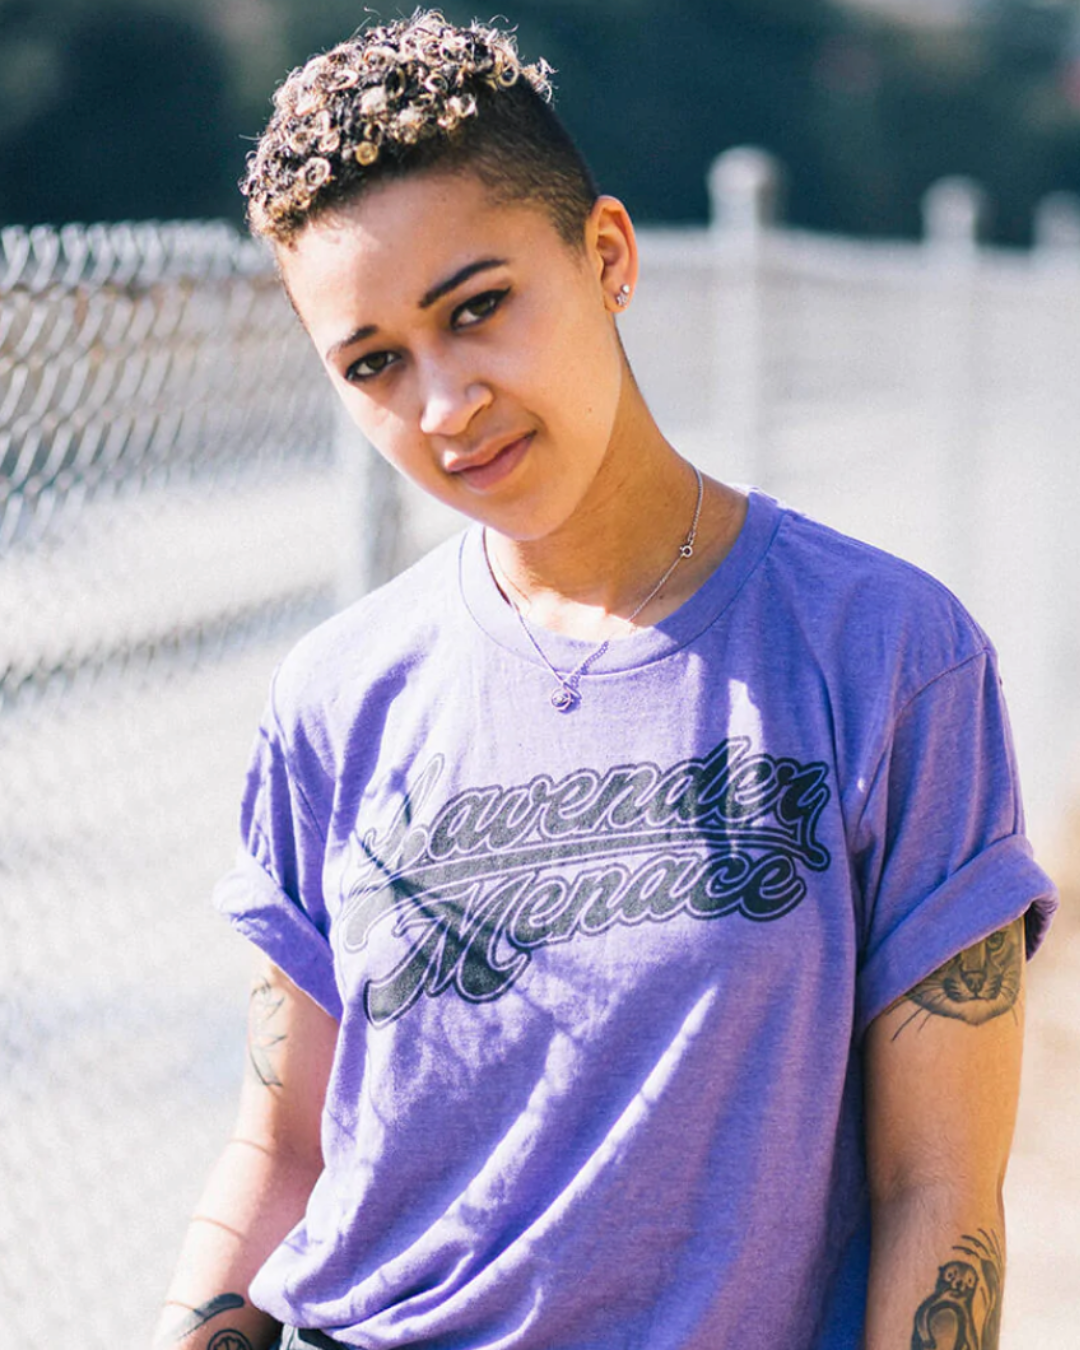 Model Savannah is wearing the Lavender Menace Tee in size L. They are 5'4" and their bra size is 34C. The tee is a faded purple with a dark grey graphic that says "Lavender Menace" in a retro sporty cursive typeface.